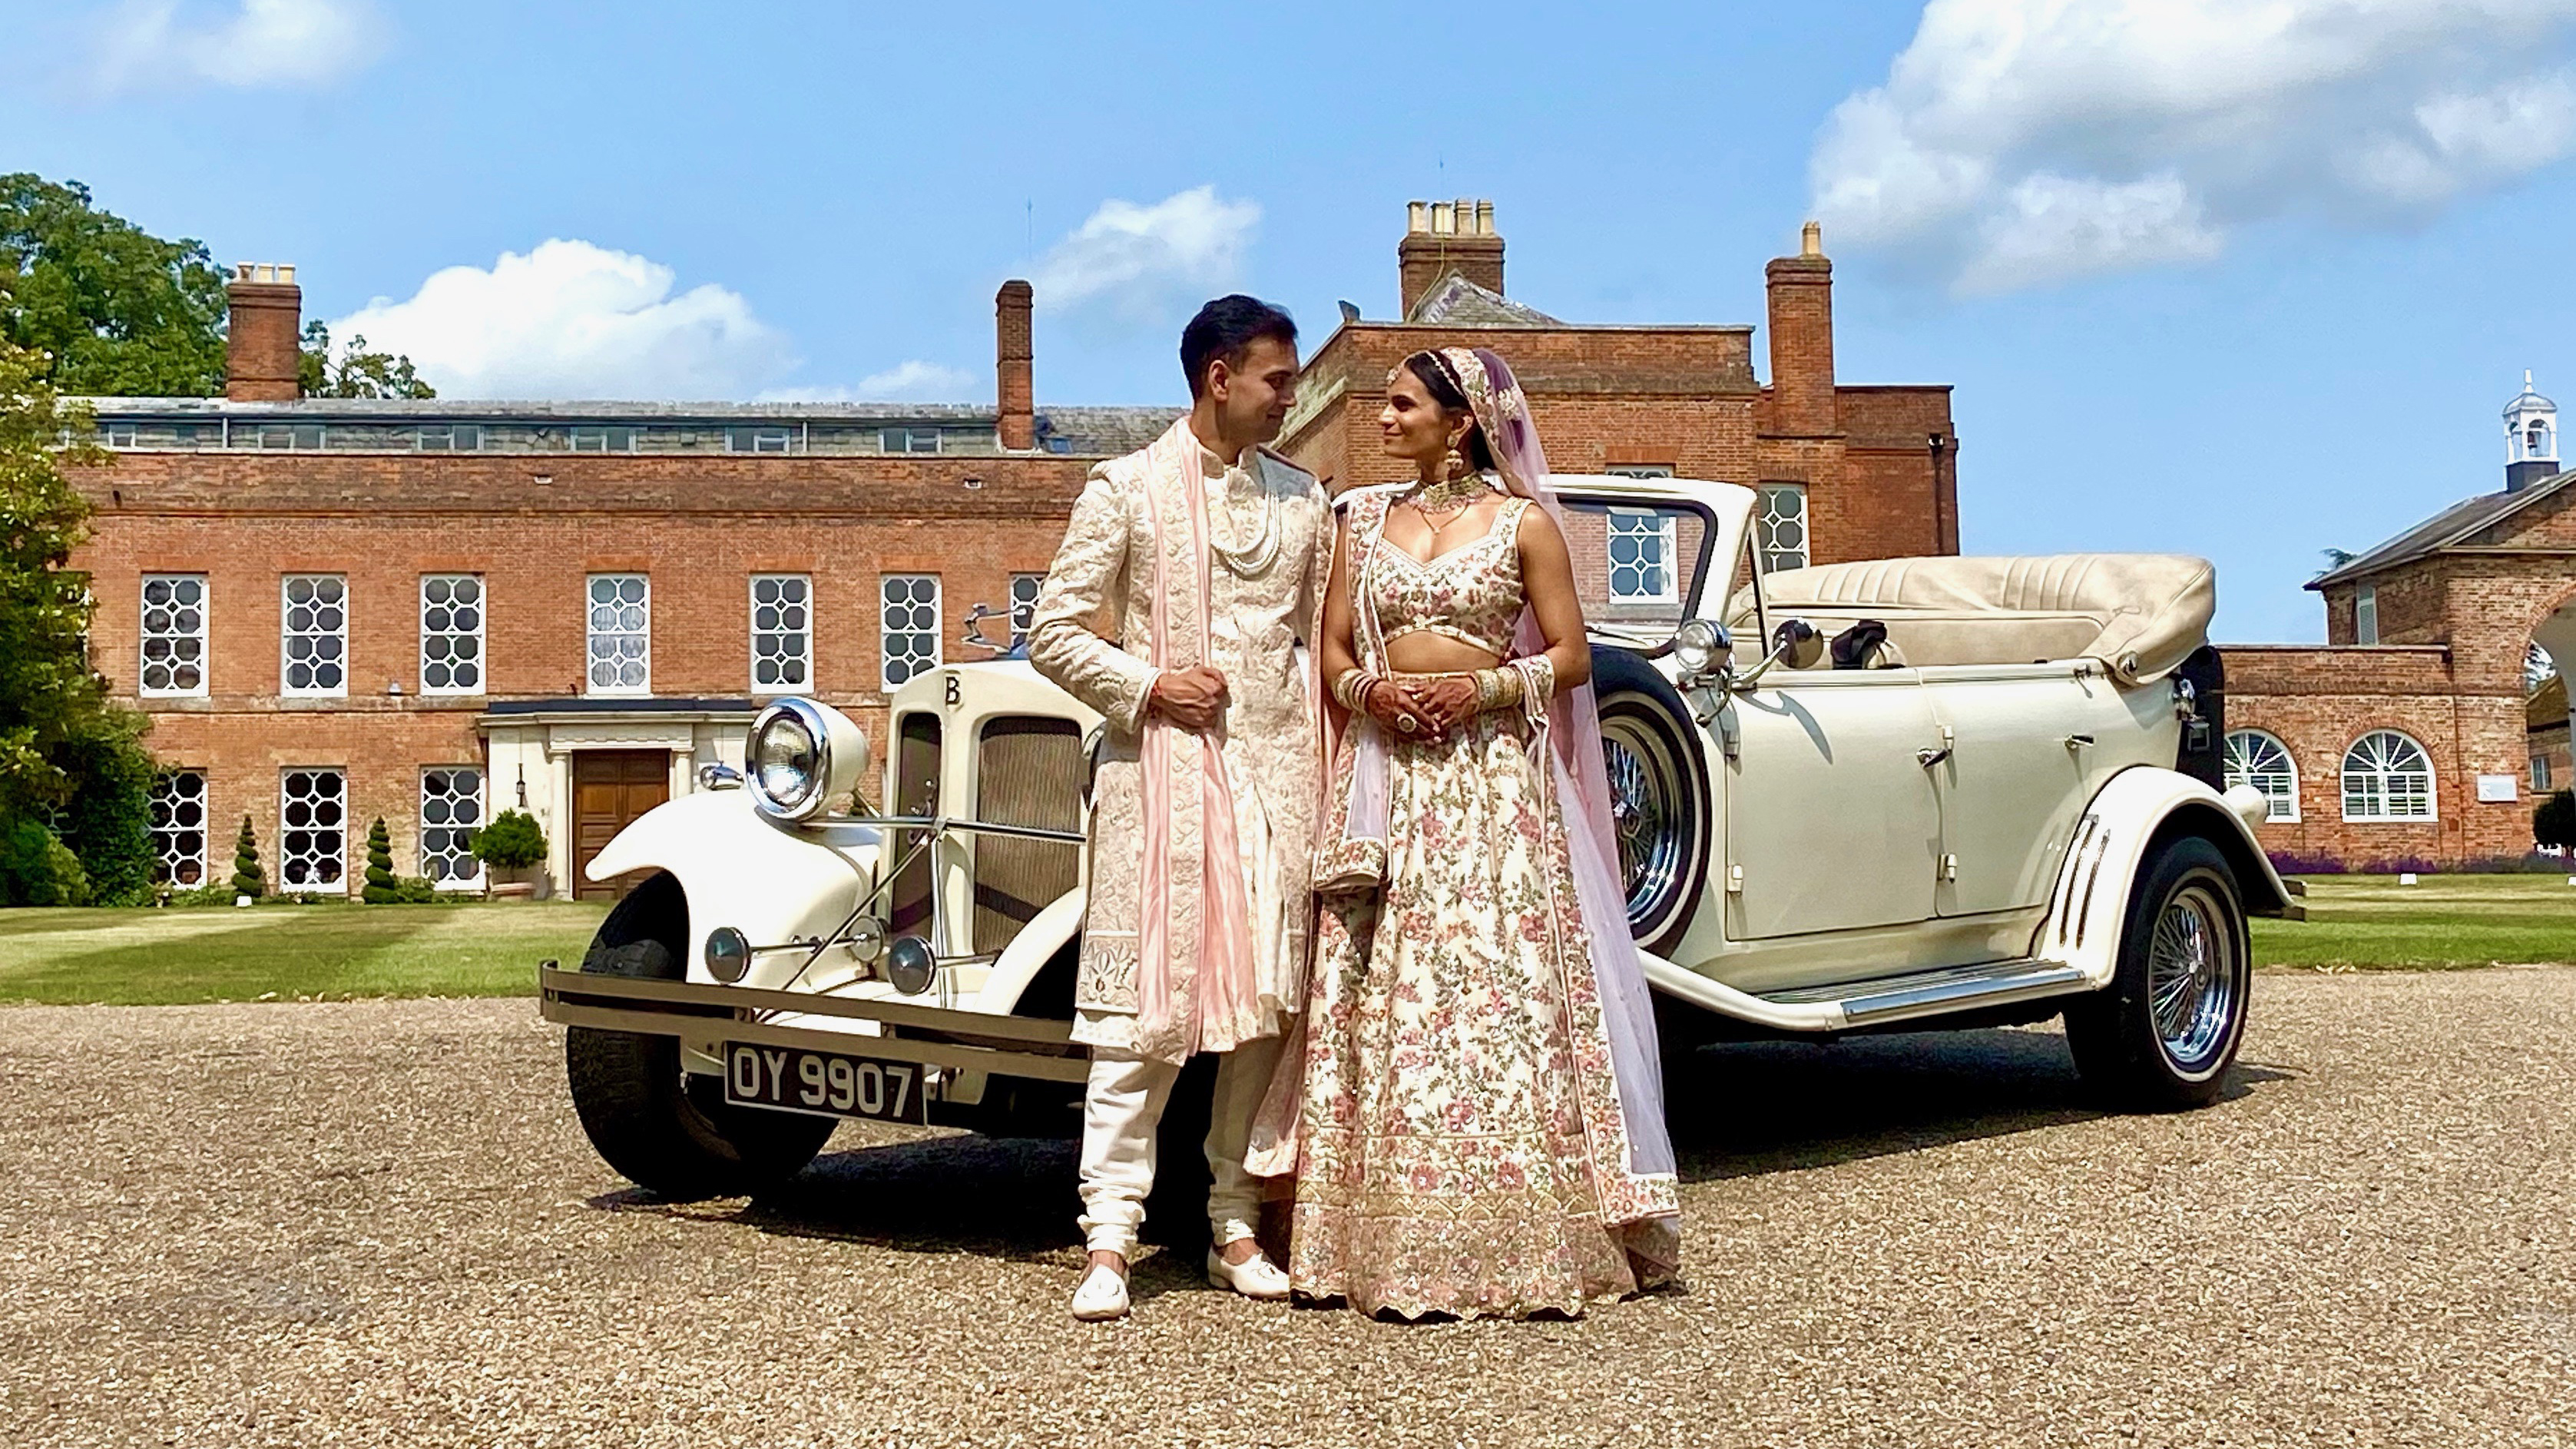 Convertible vintage style Beauford with roof down with newly wed Asian couple standing in front of the vehicle looking at each others. Vehicle is parked in front of a large manor house in Bexleyheath